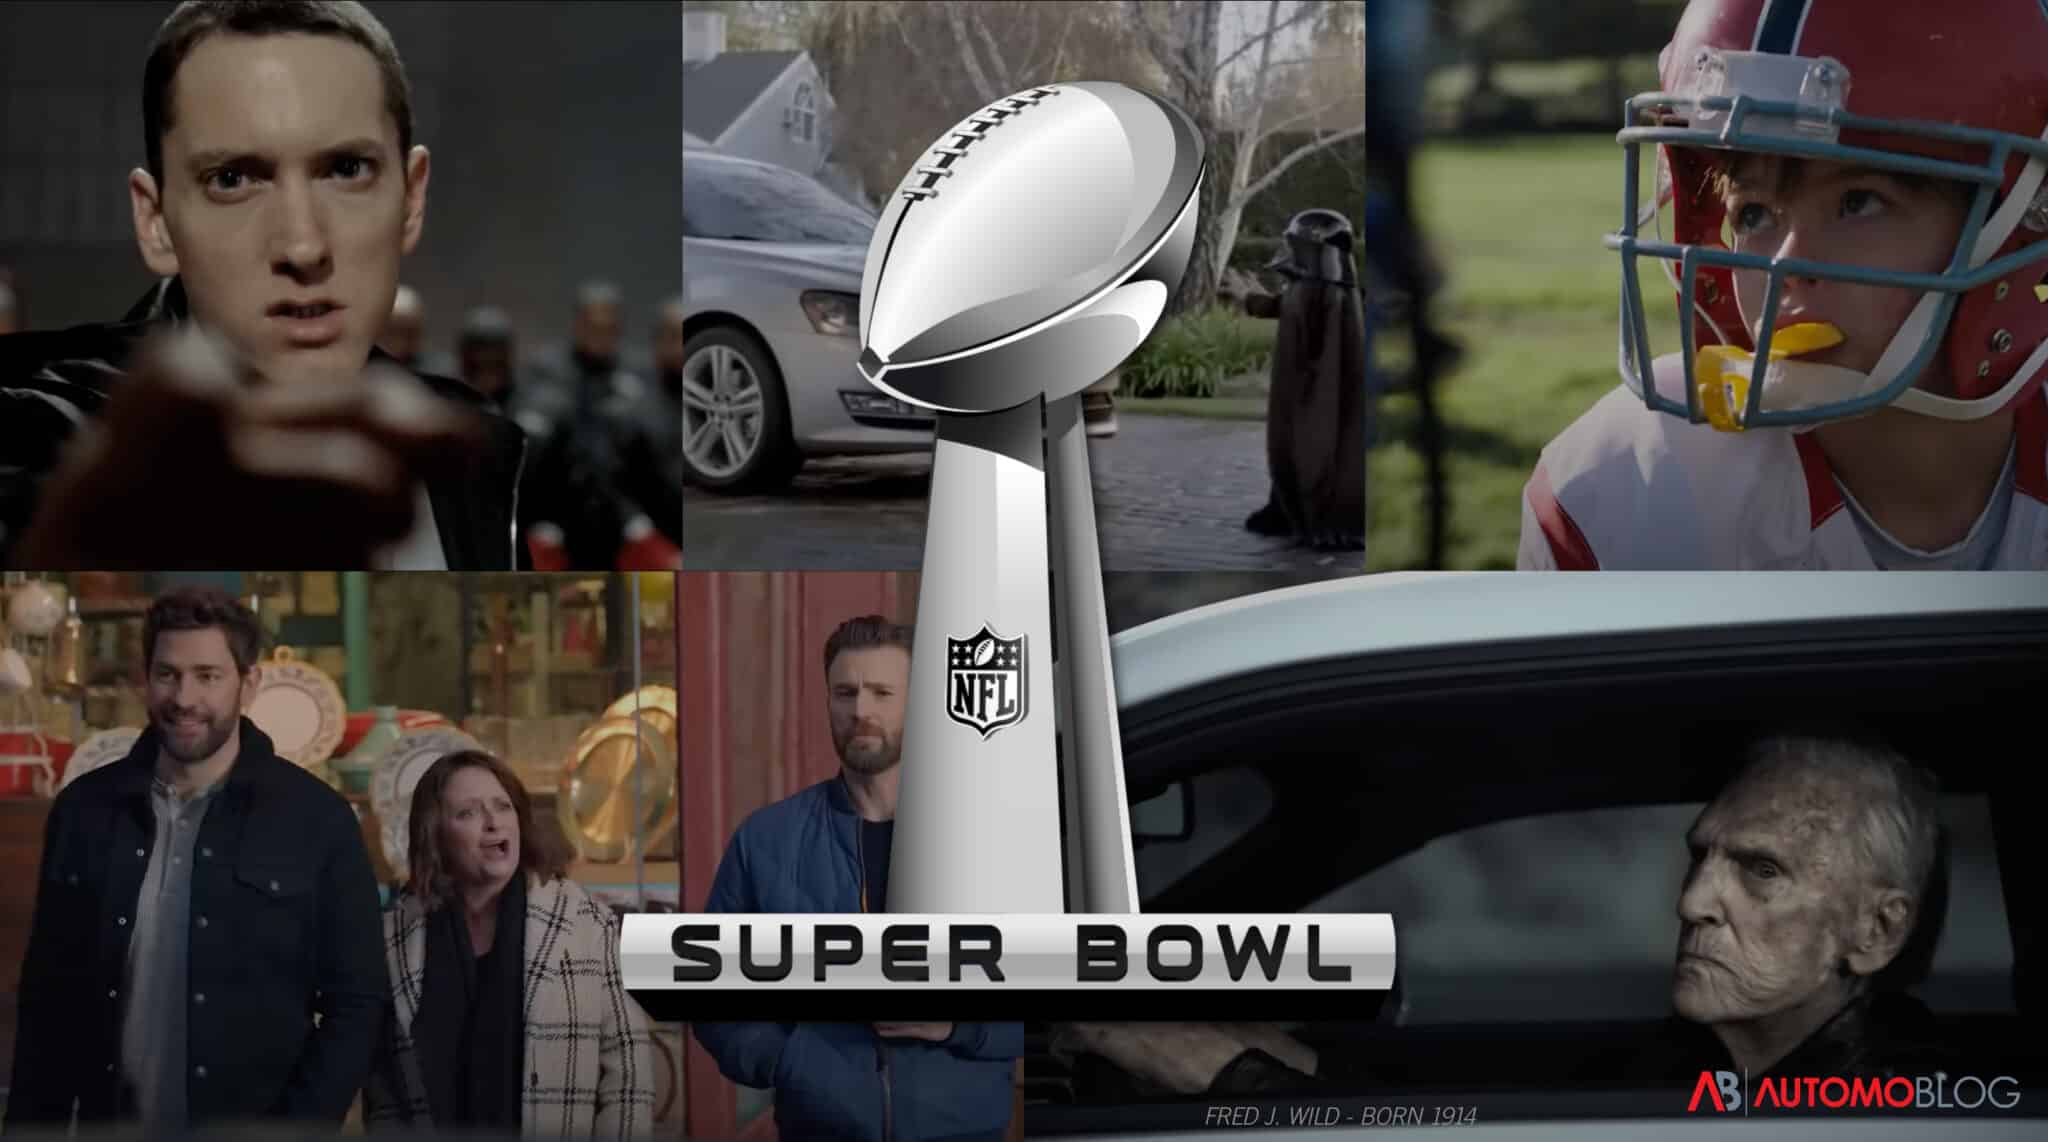 10 Best Super Bowl Car Ads, From Hilarious to Heartwarming